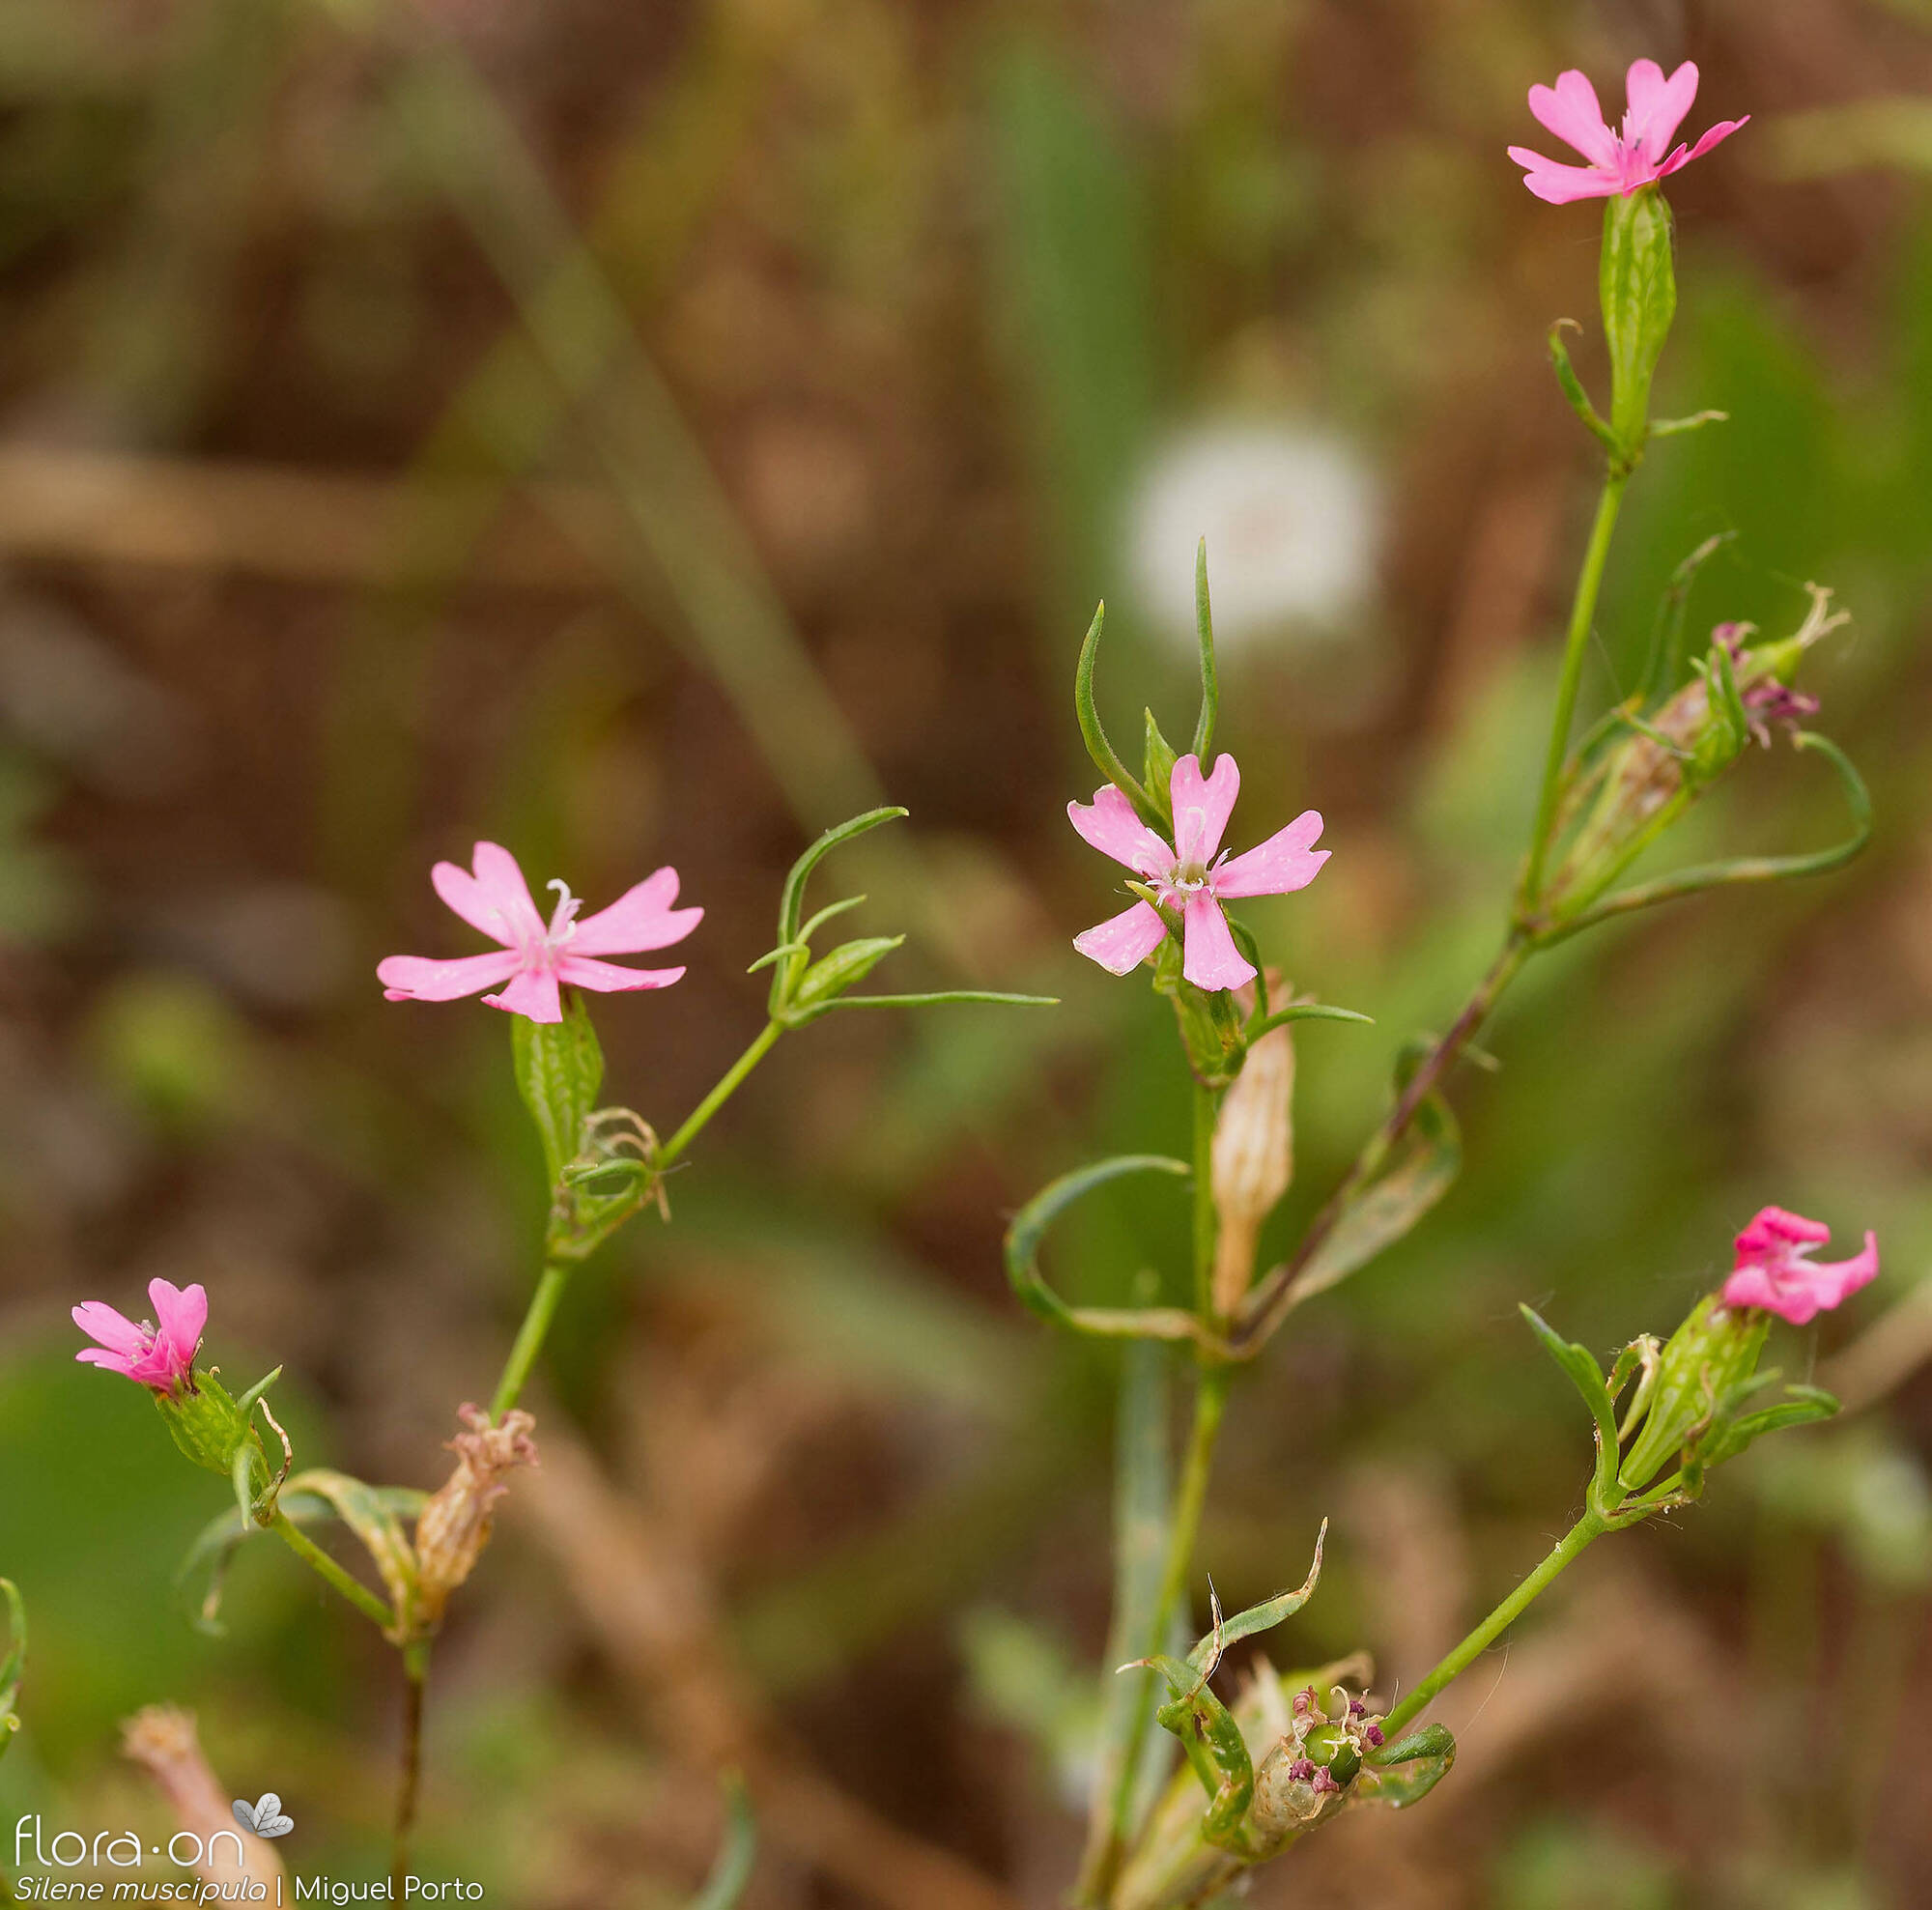 Silene muscipula - Flor (geral) | Miguel Porto; CC BY-NC 4.0